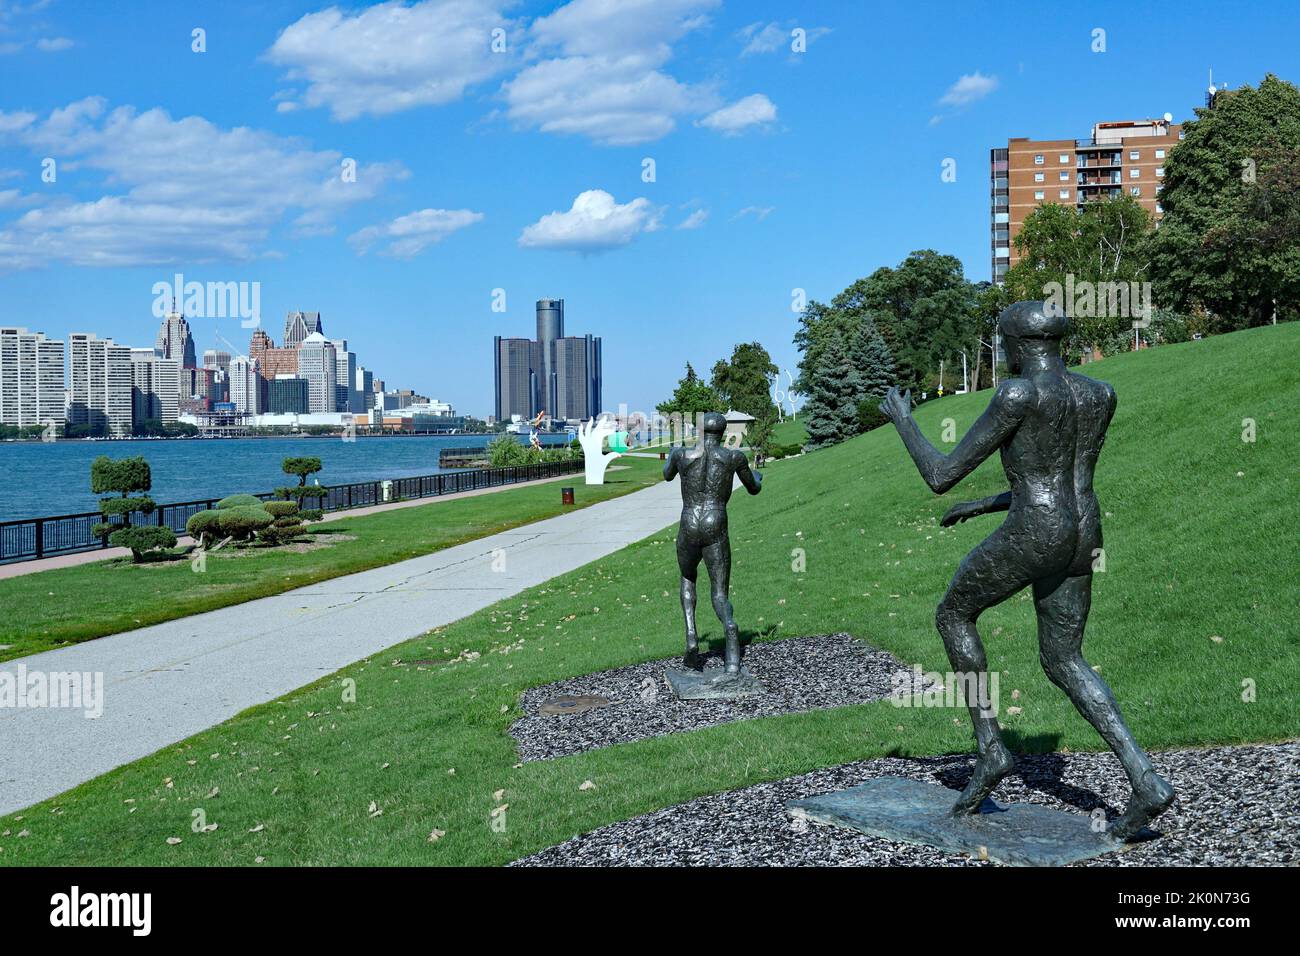 Windsor, Ontario, Canada - Sculpture Park beside the Detroit River, showing Flying Men by Elizabeth Frink, with the skyline of Detroit, Michigan Stock Photo